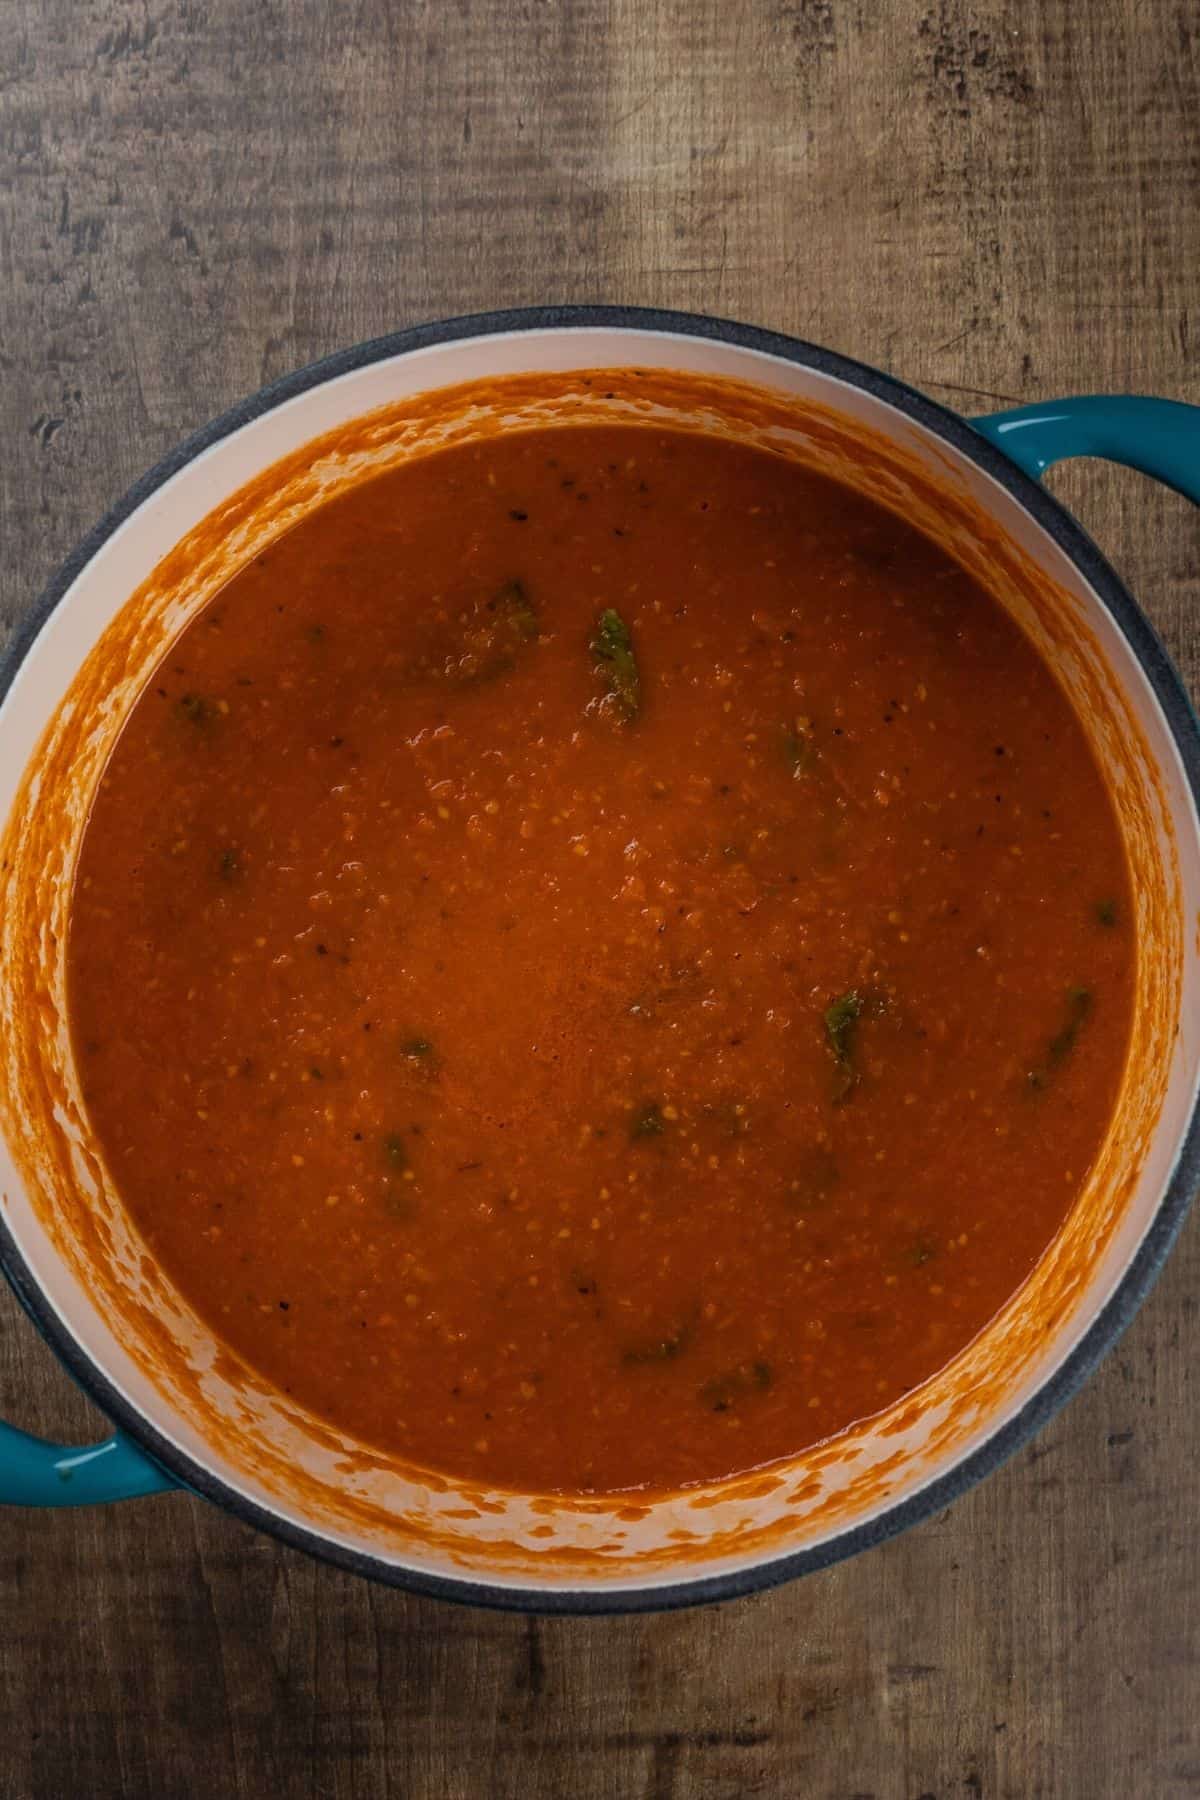 The finished cooking tomato soup in a large blue ceramic pot.